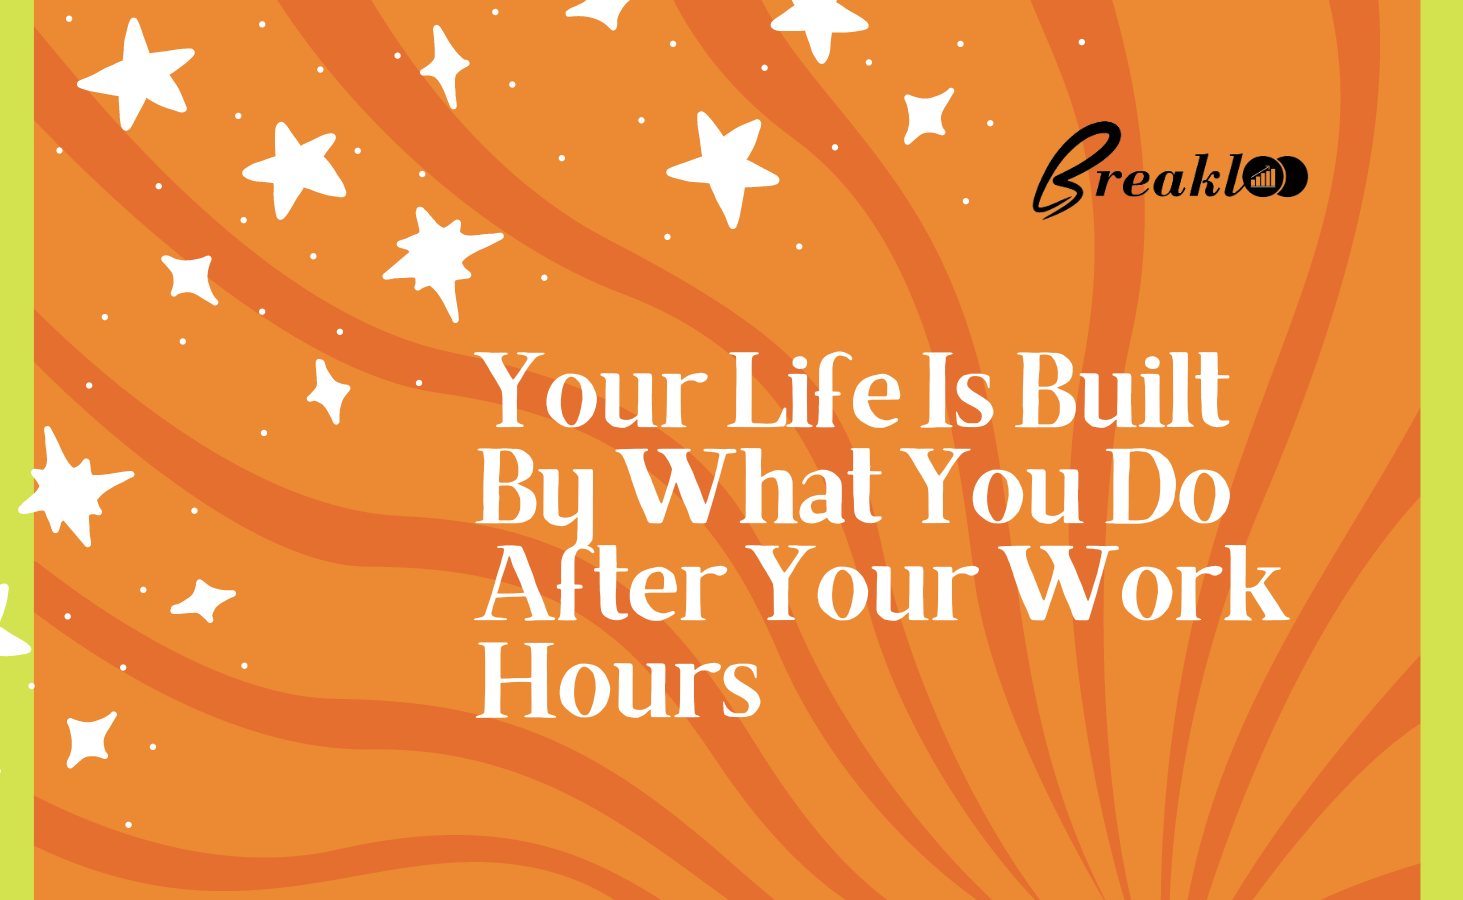 Your Life Is Built By What You Do After Your Work Hours